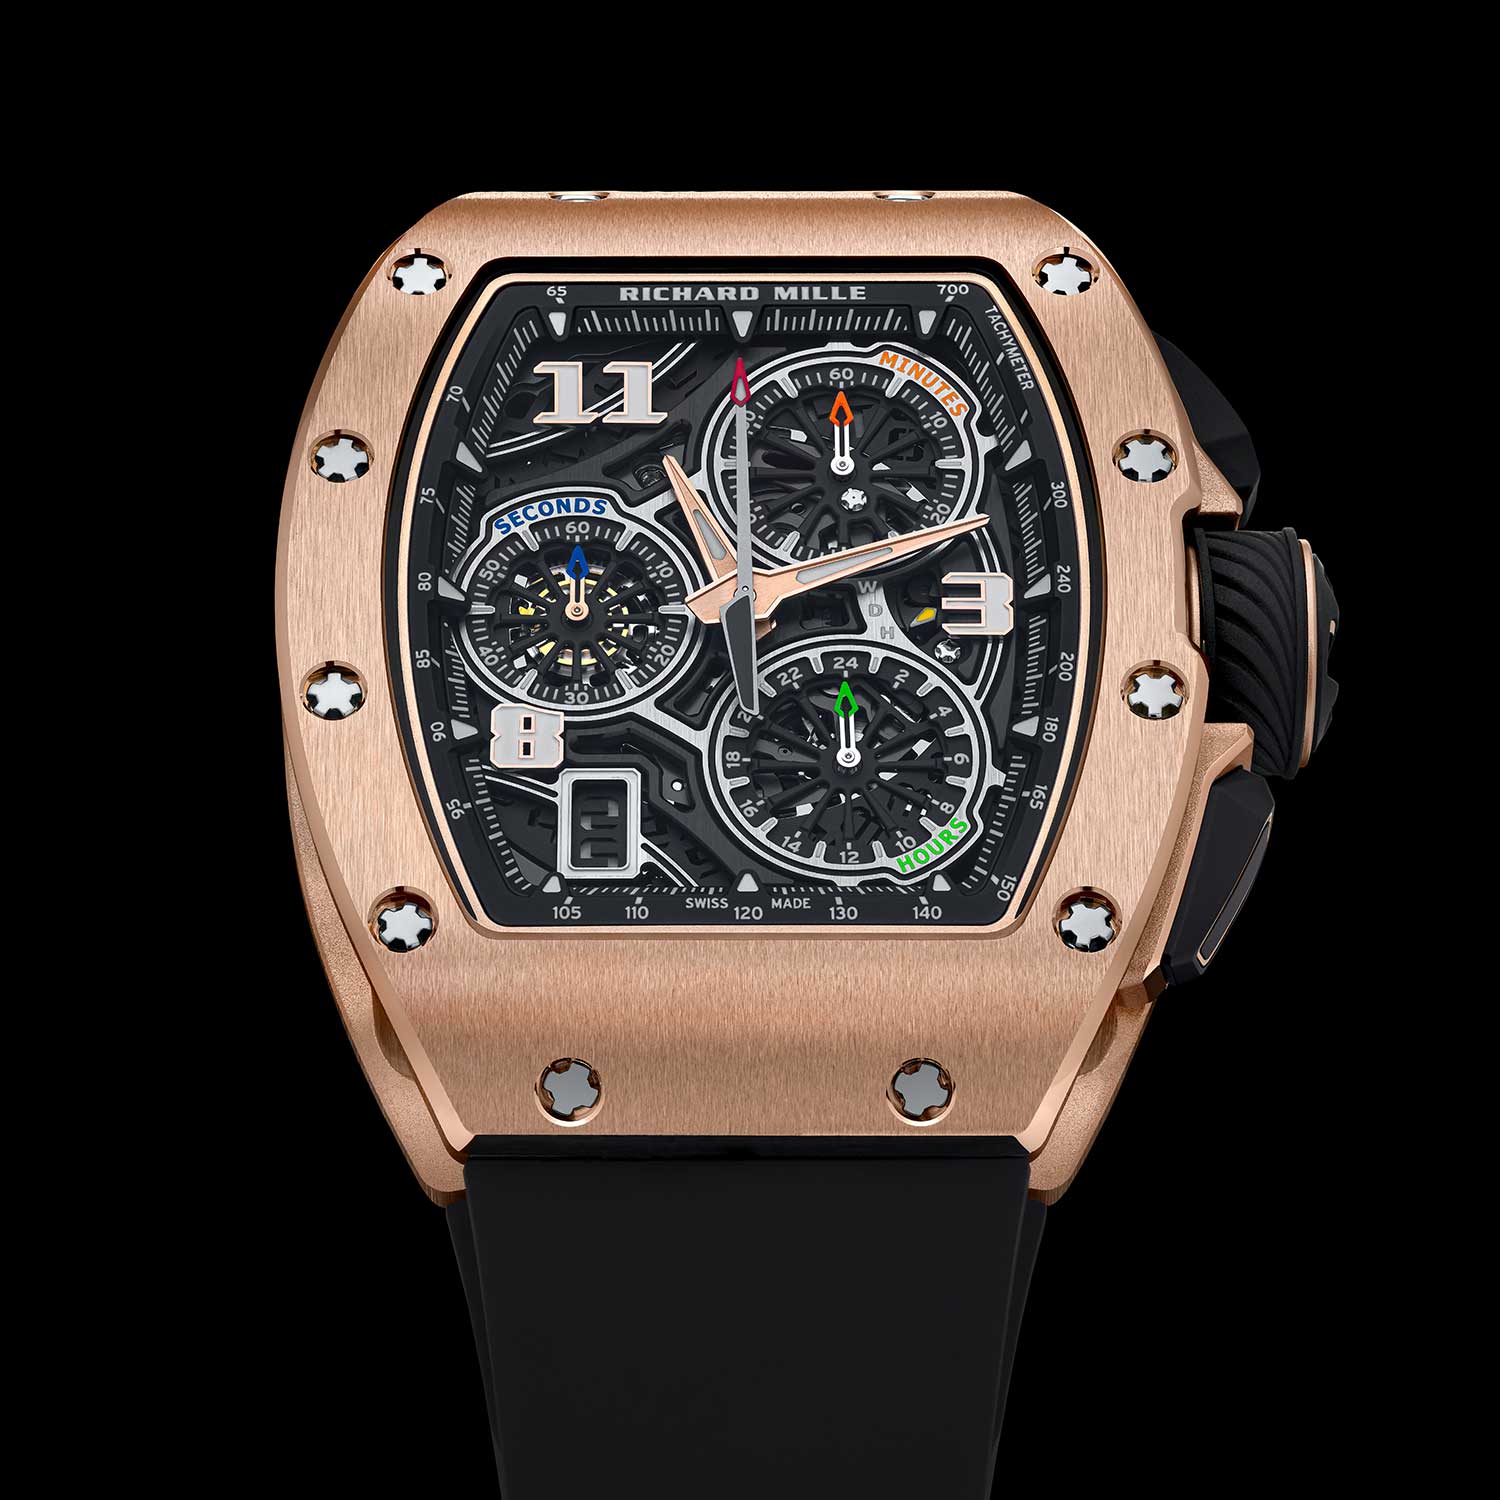 Richard Mille RM 72-01 Automatic Winding Lifestyle Flyback Chronograph